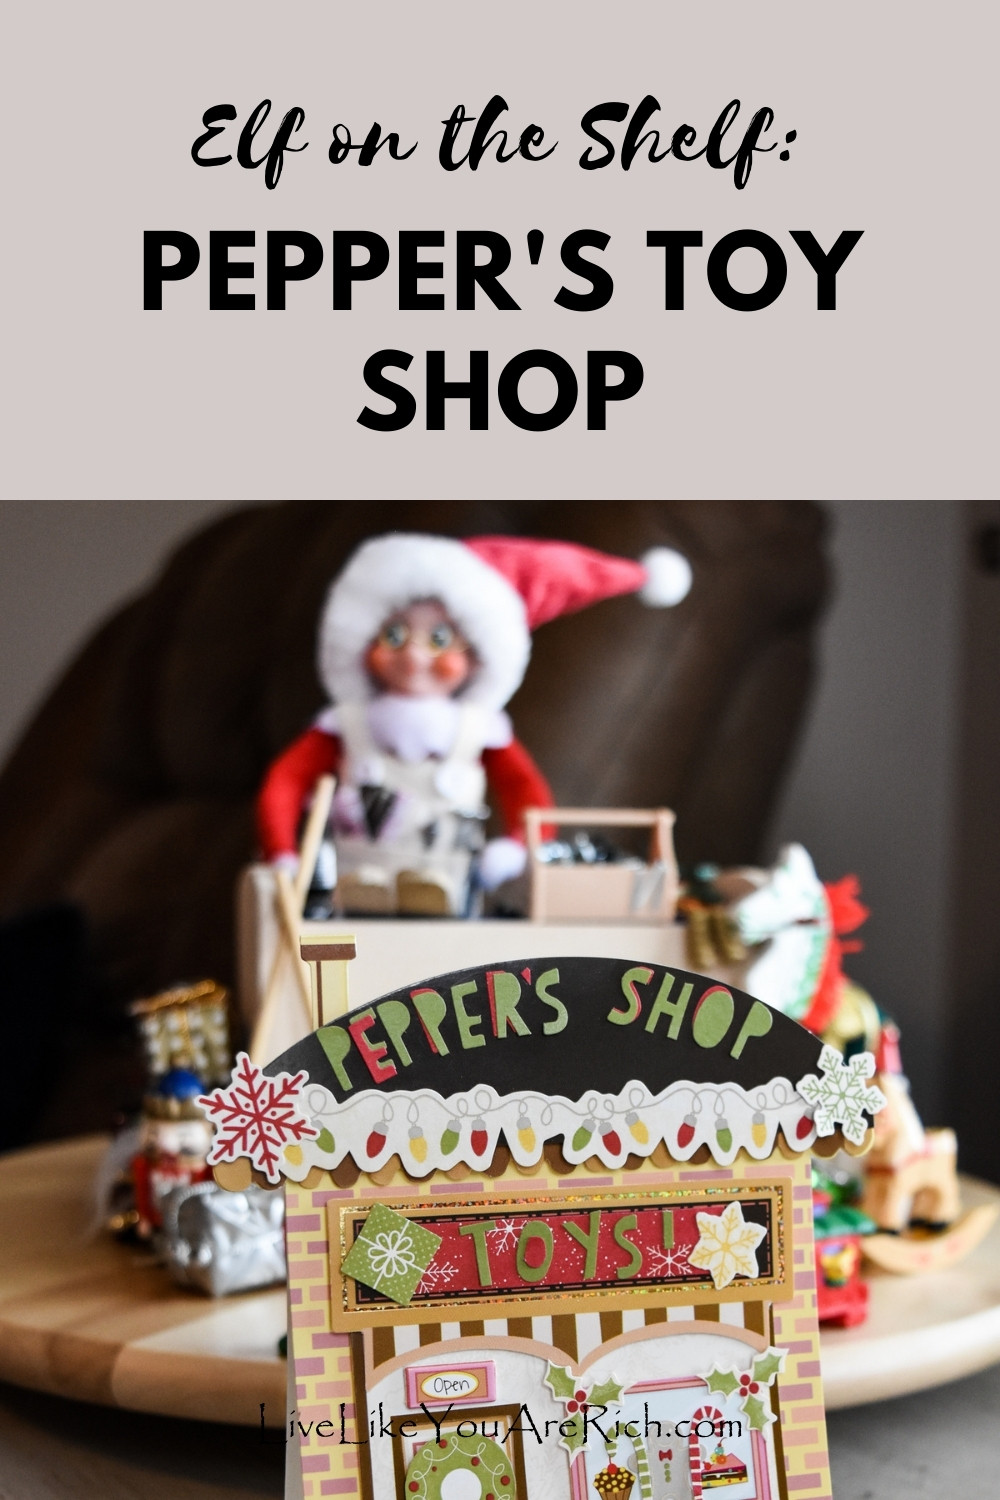 Elf on the Shelf: Pepper's Toy Shop